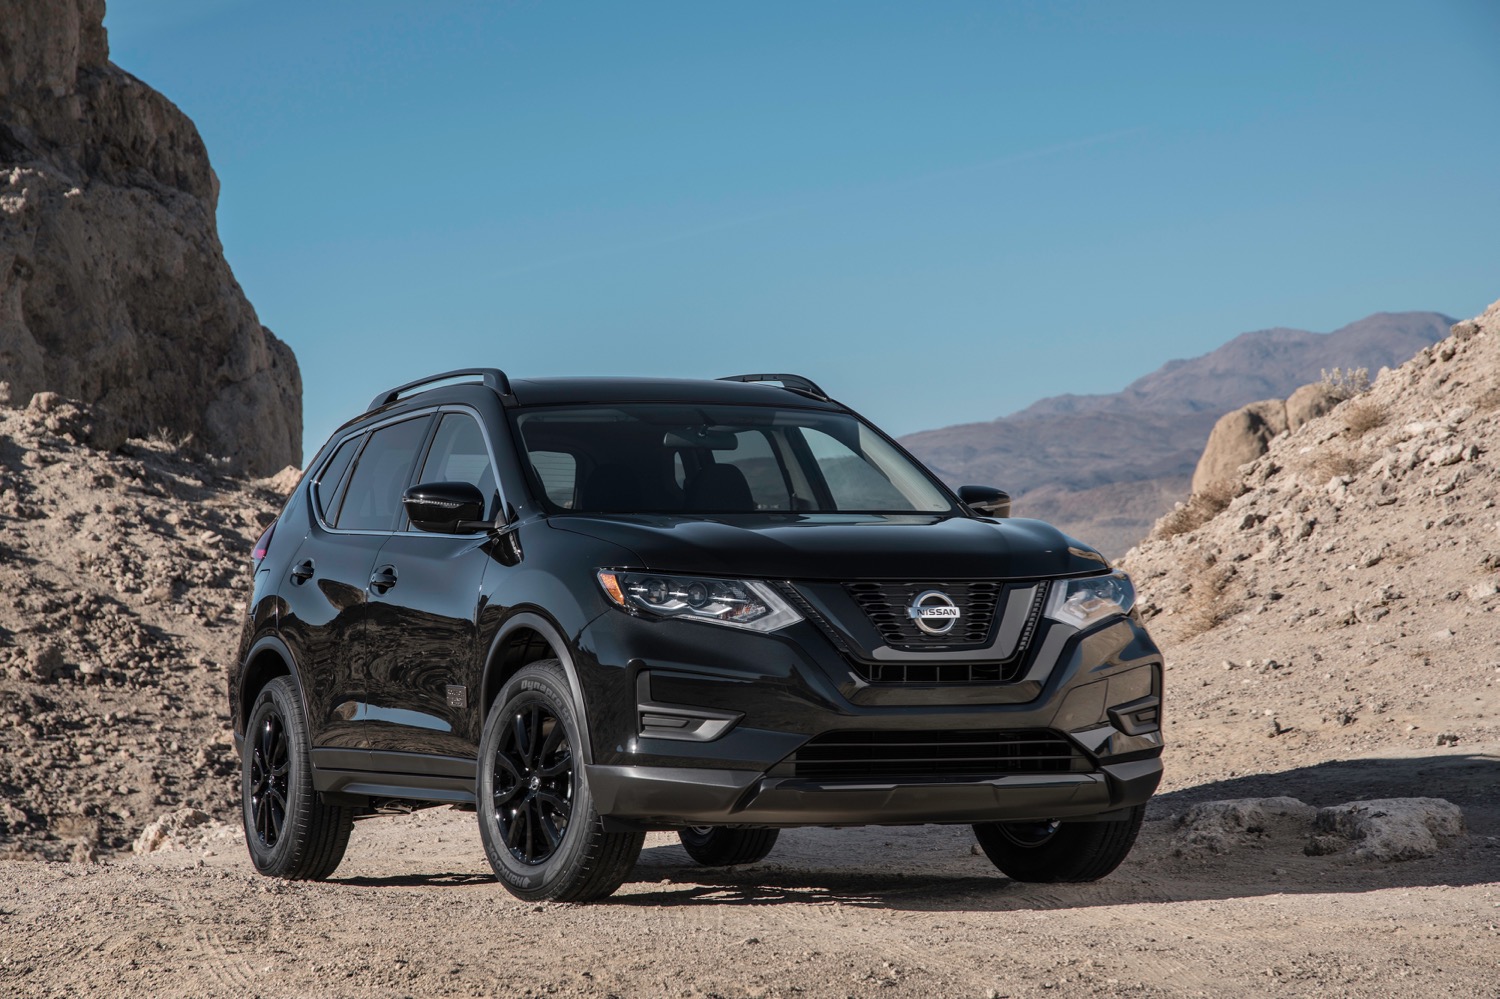 2017 nissan rogue one star wars limited edition gets themed